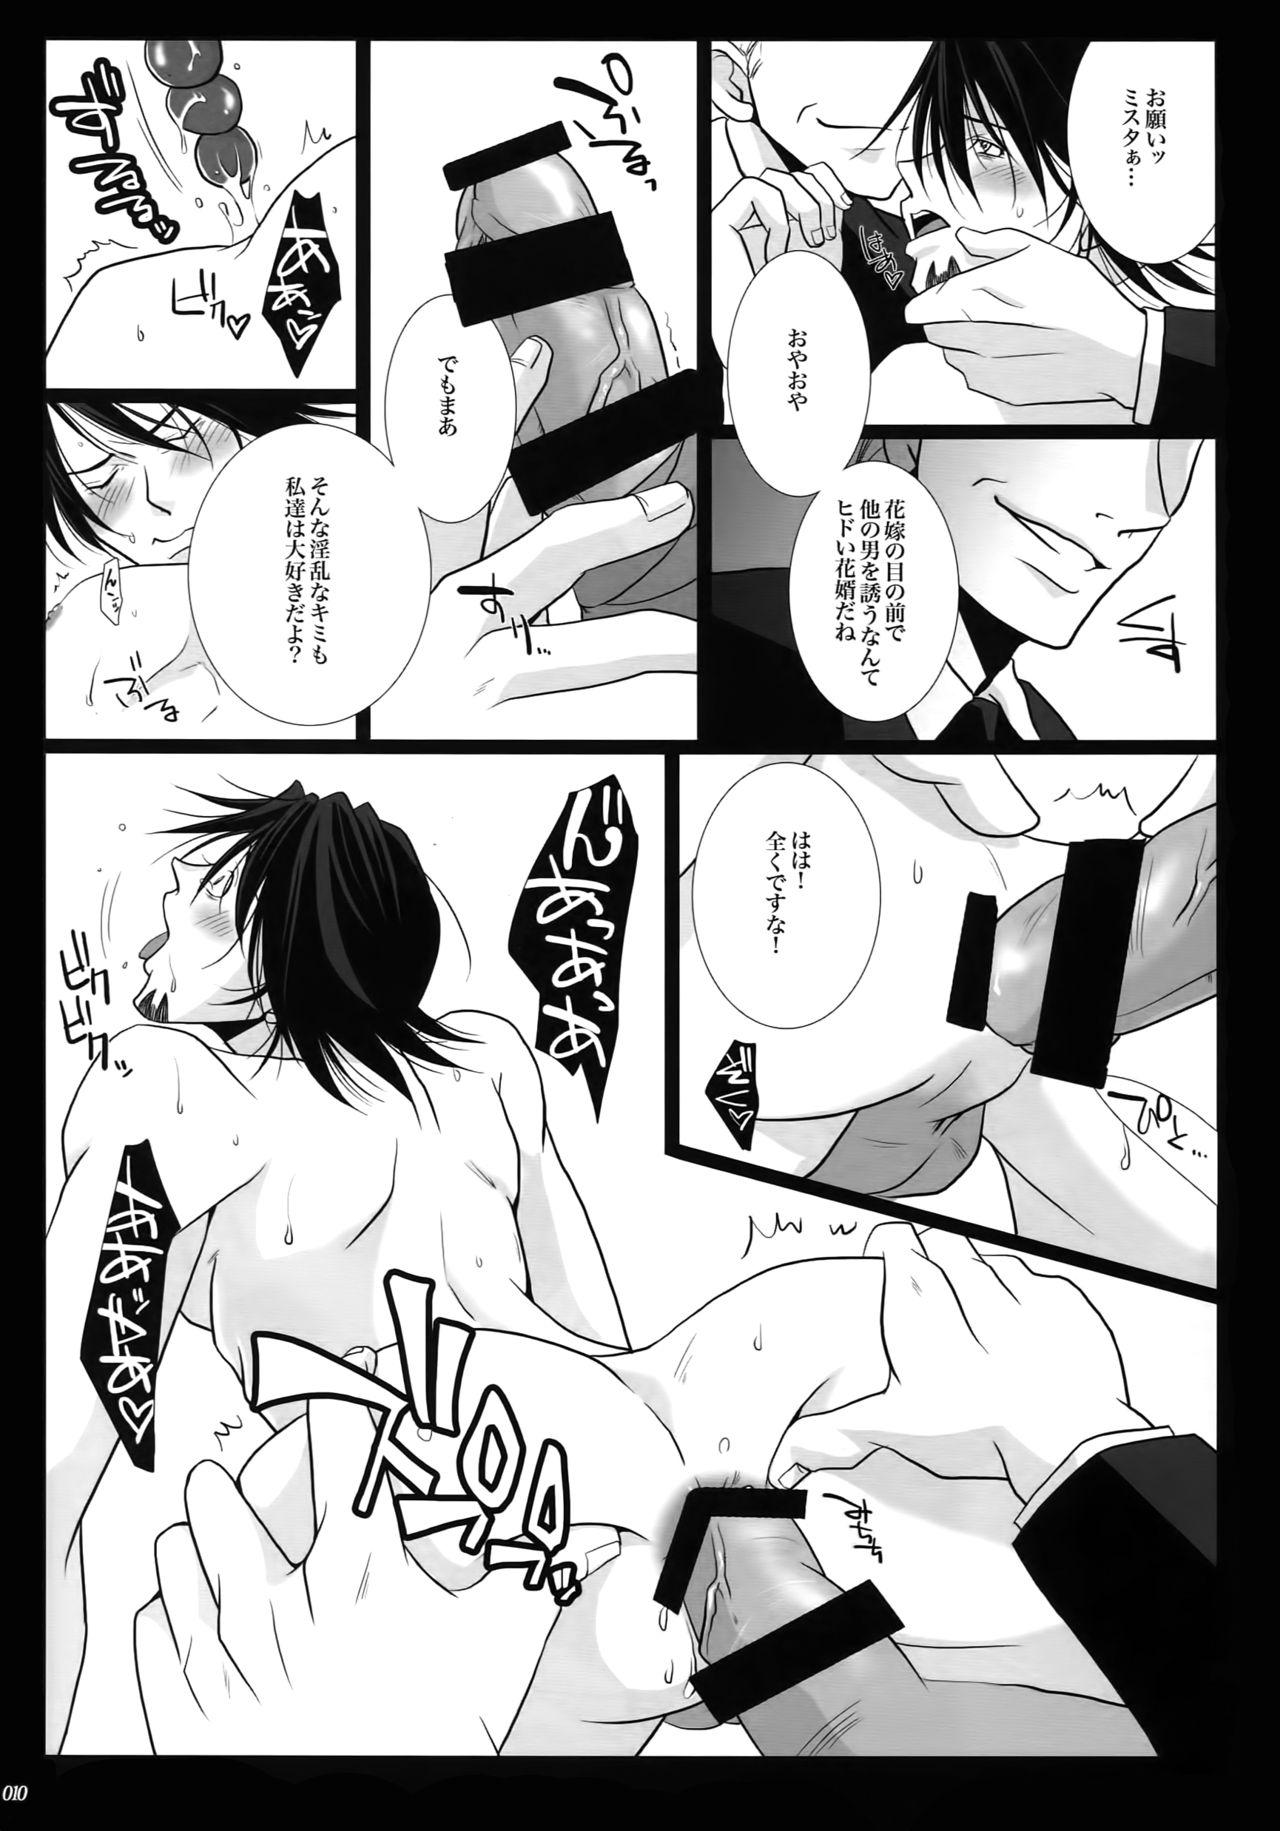 Teen mob;Re - Tiger and bunny Black Dick - Page 9